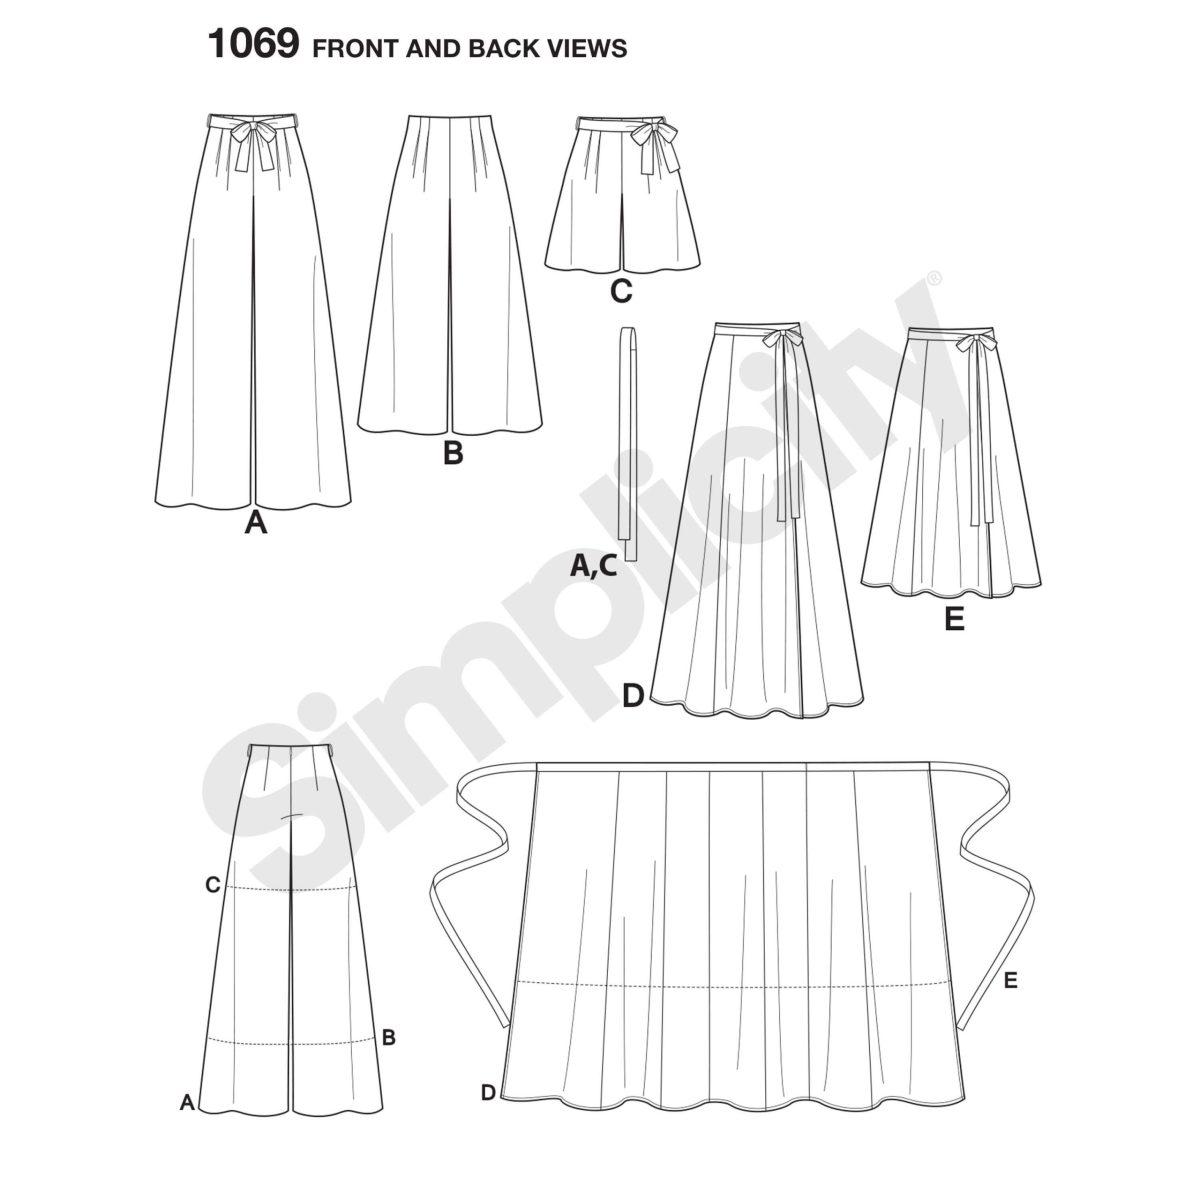 Simplicity Sewing Pattern 1069 Misses' Wide Leg Trousers or Shorts & Skirts in 2 Lengths